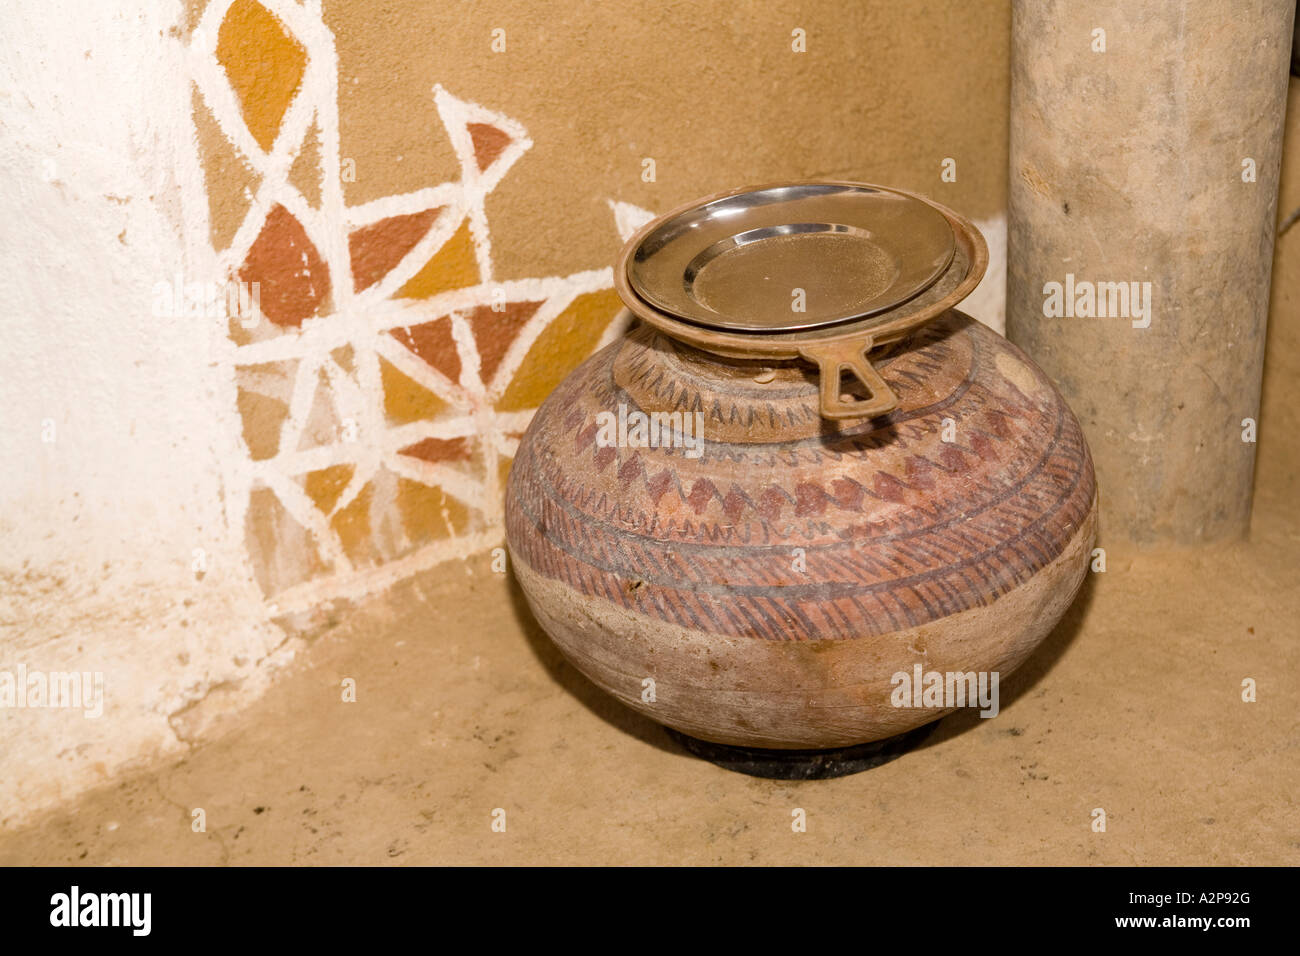 India Rajasthan Thar Desert village architecture decorated mud rendered wall and water pot Stock Photo